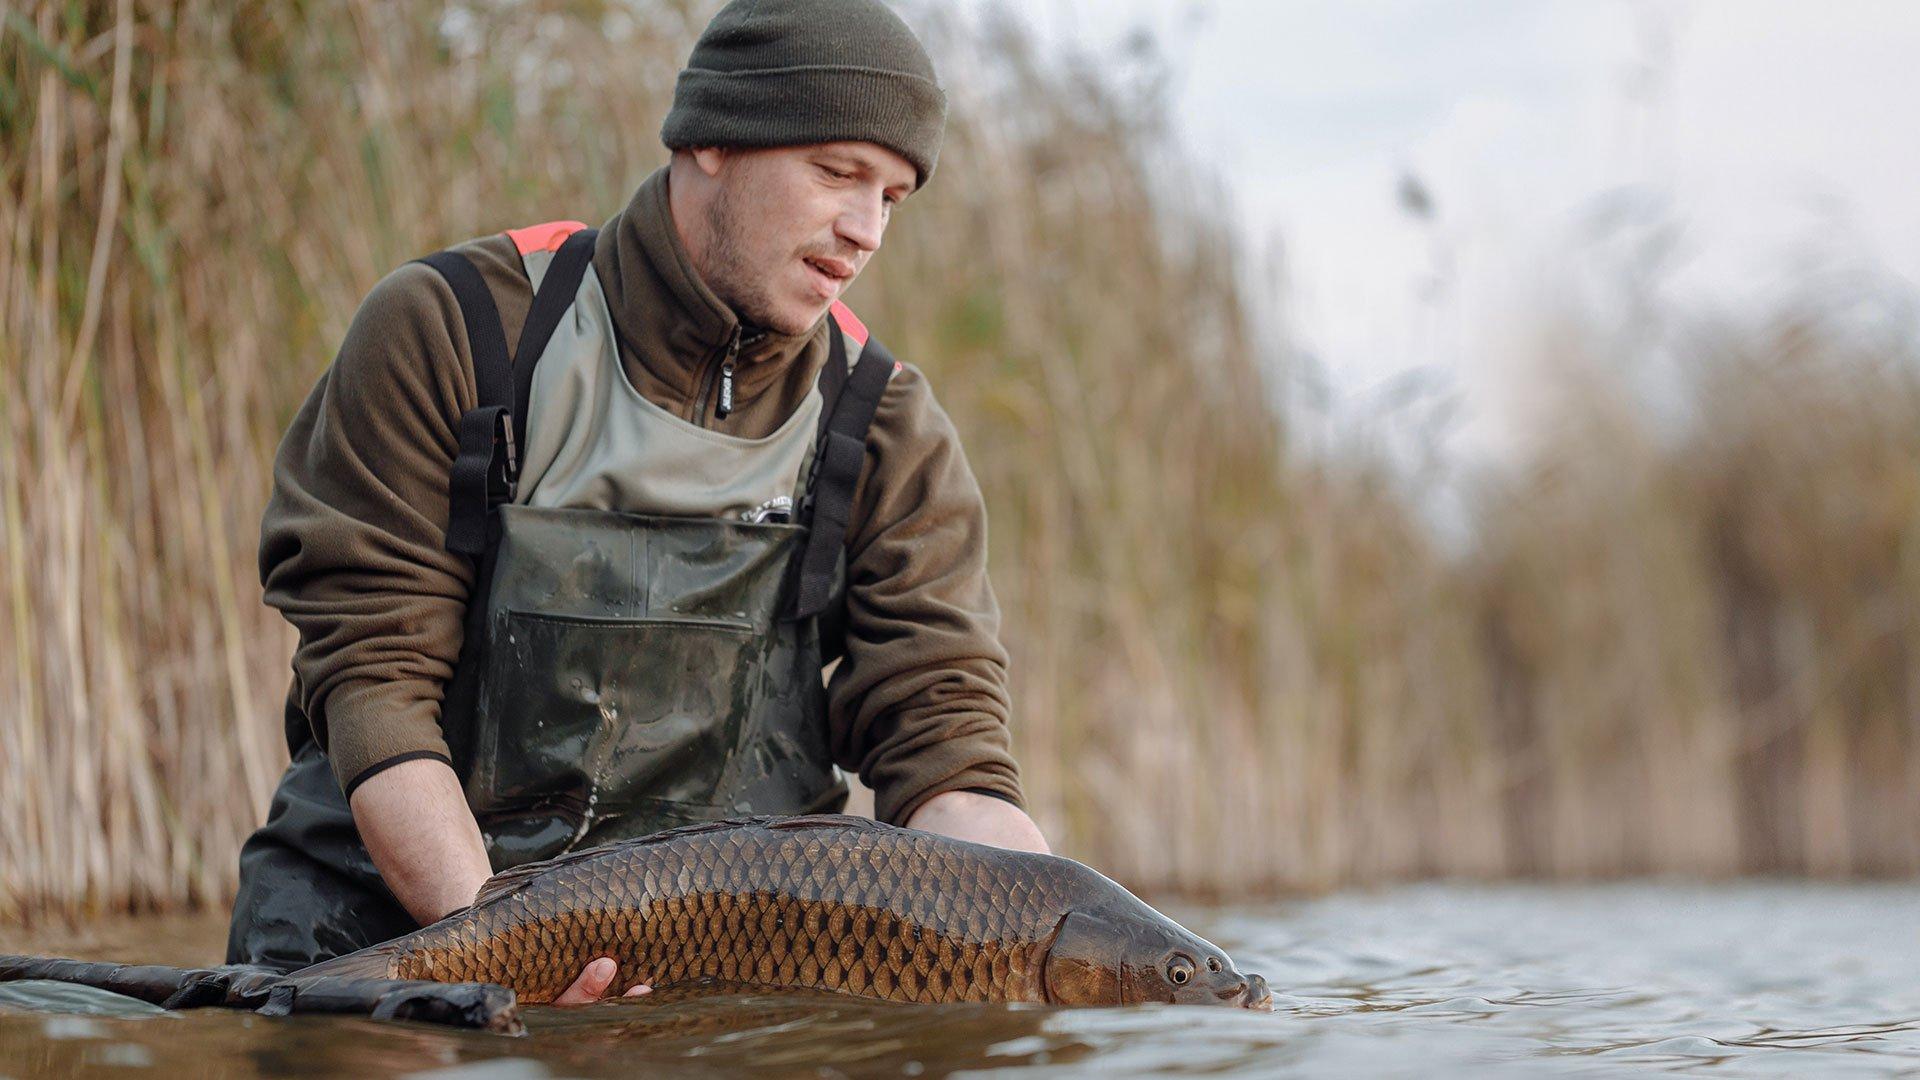 Angling Advice: What To Wear When Carp Fishing